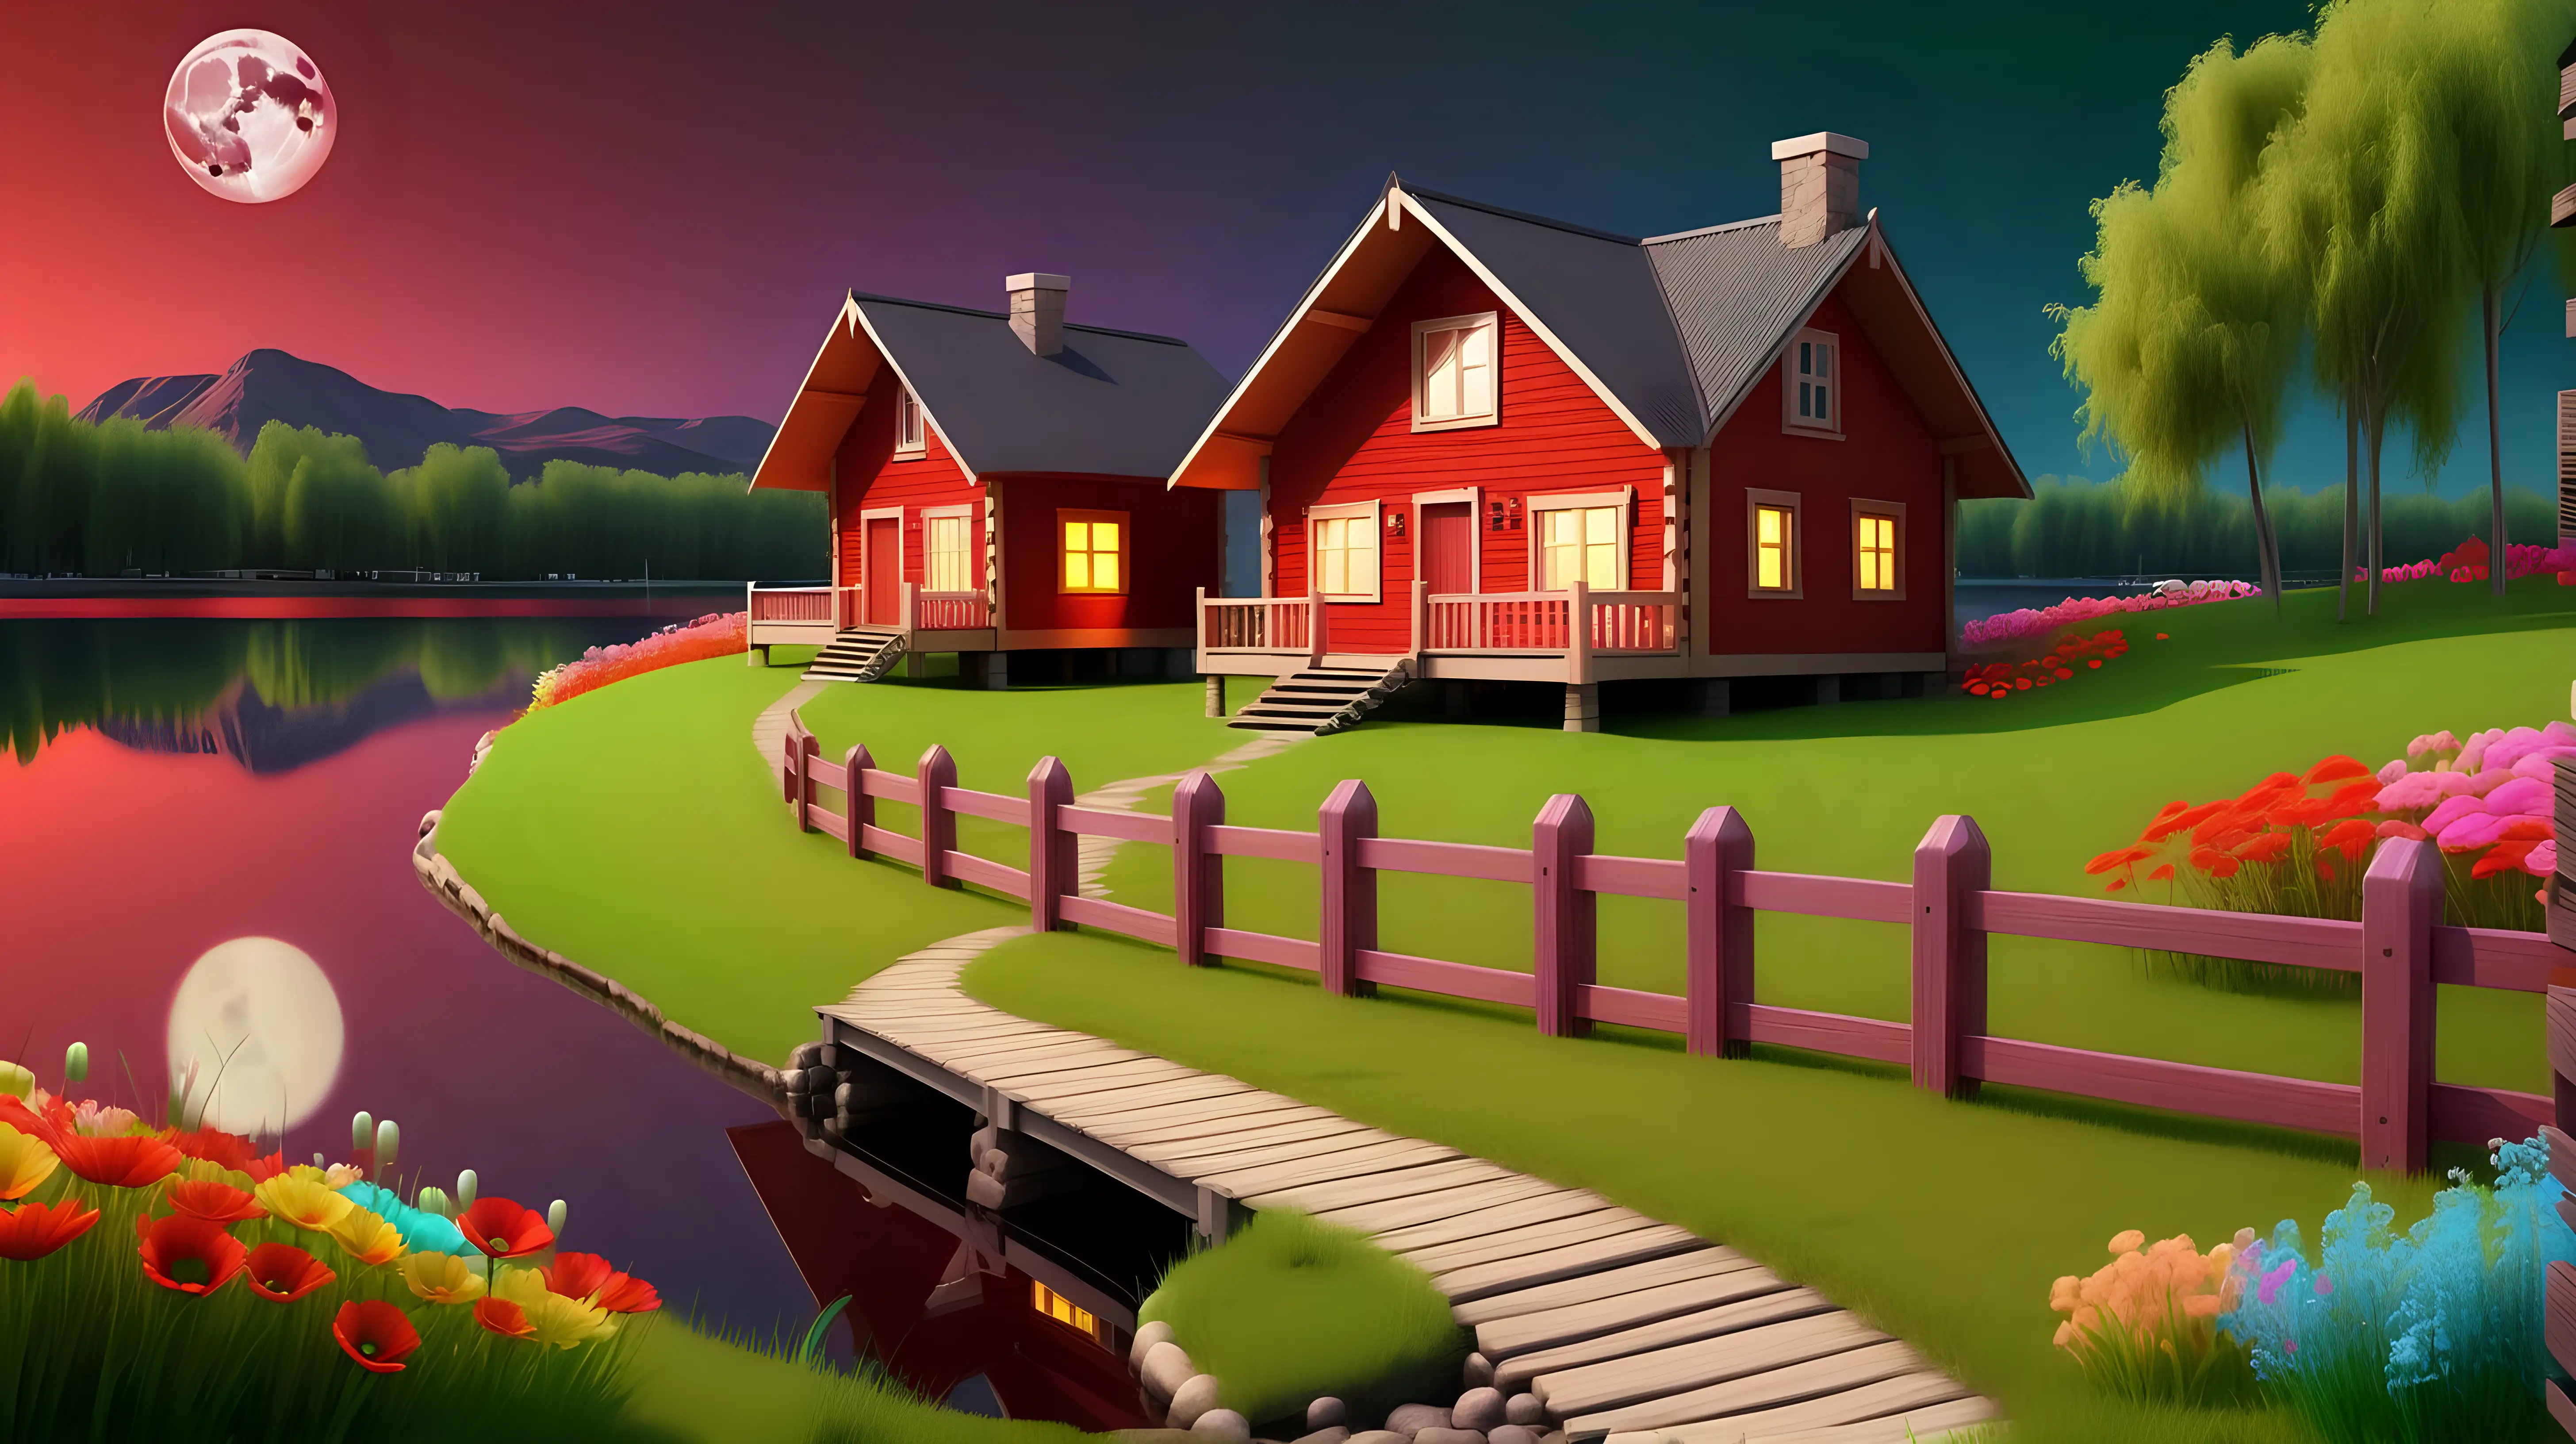 Moonlit Lakeside Wooden House with Vibrant Flowers and Red Sky